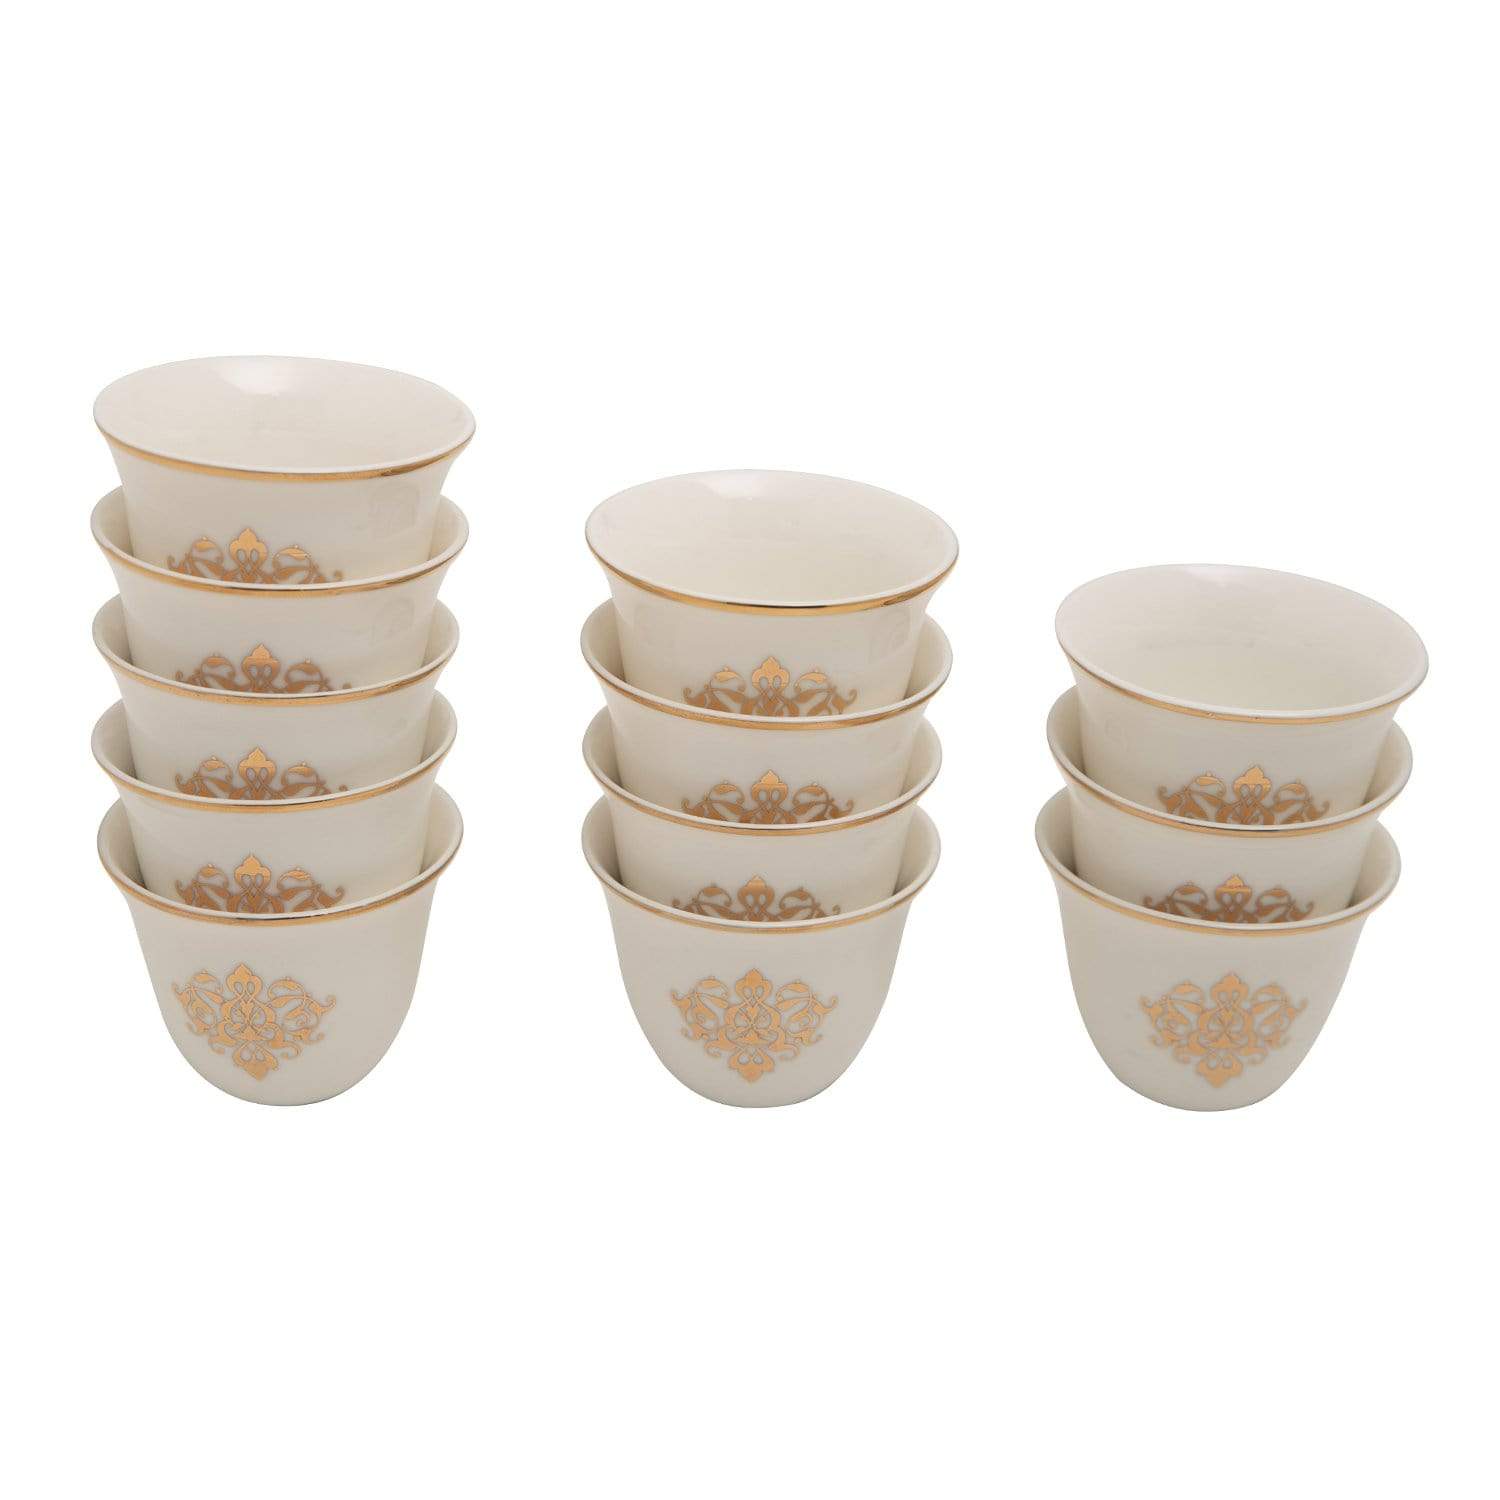 GOLD LINE 12PC ARABIC CAWA CUPS - SY116-G - SY121-G